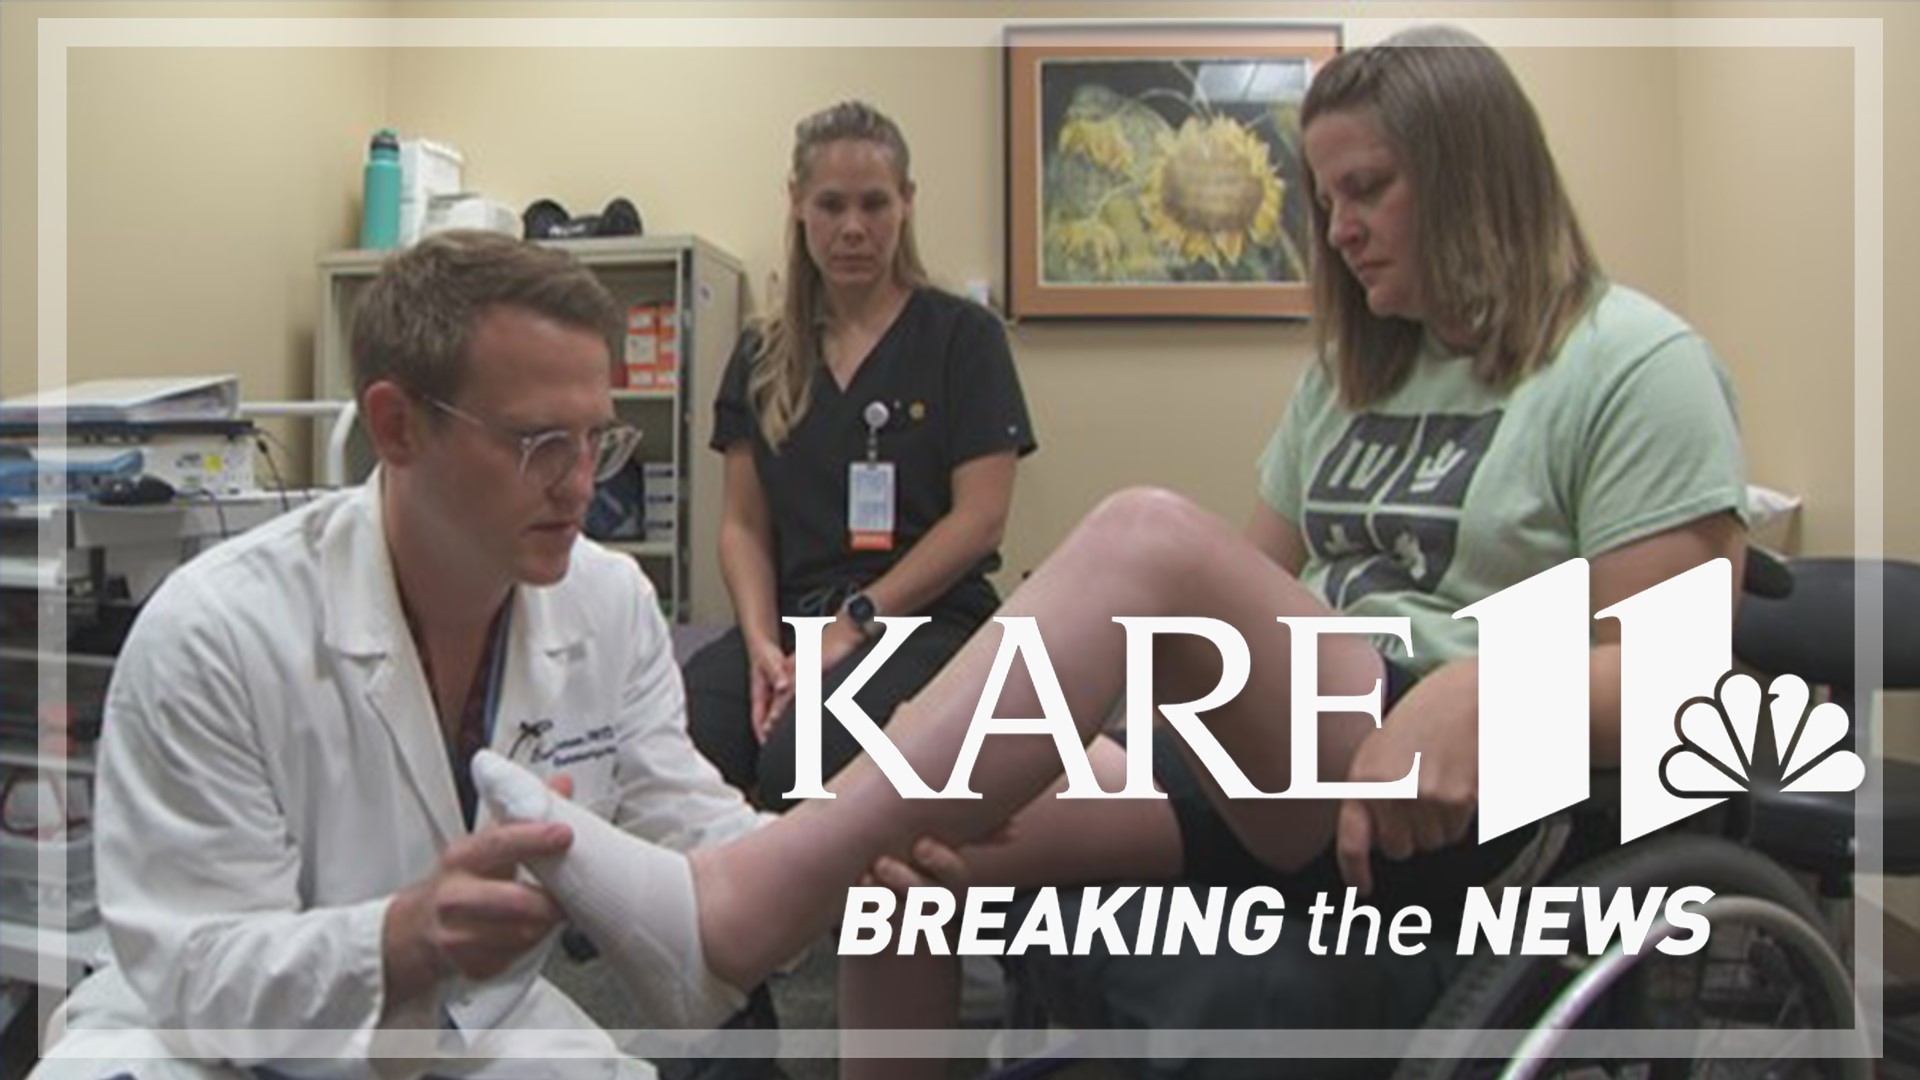 20 patients with paraplegia are seeing improvements after receiving a spinal cord implant.